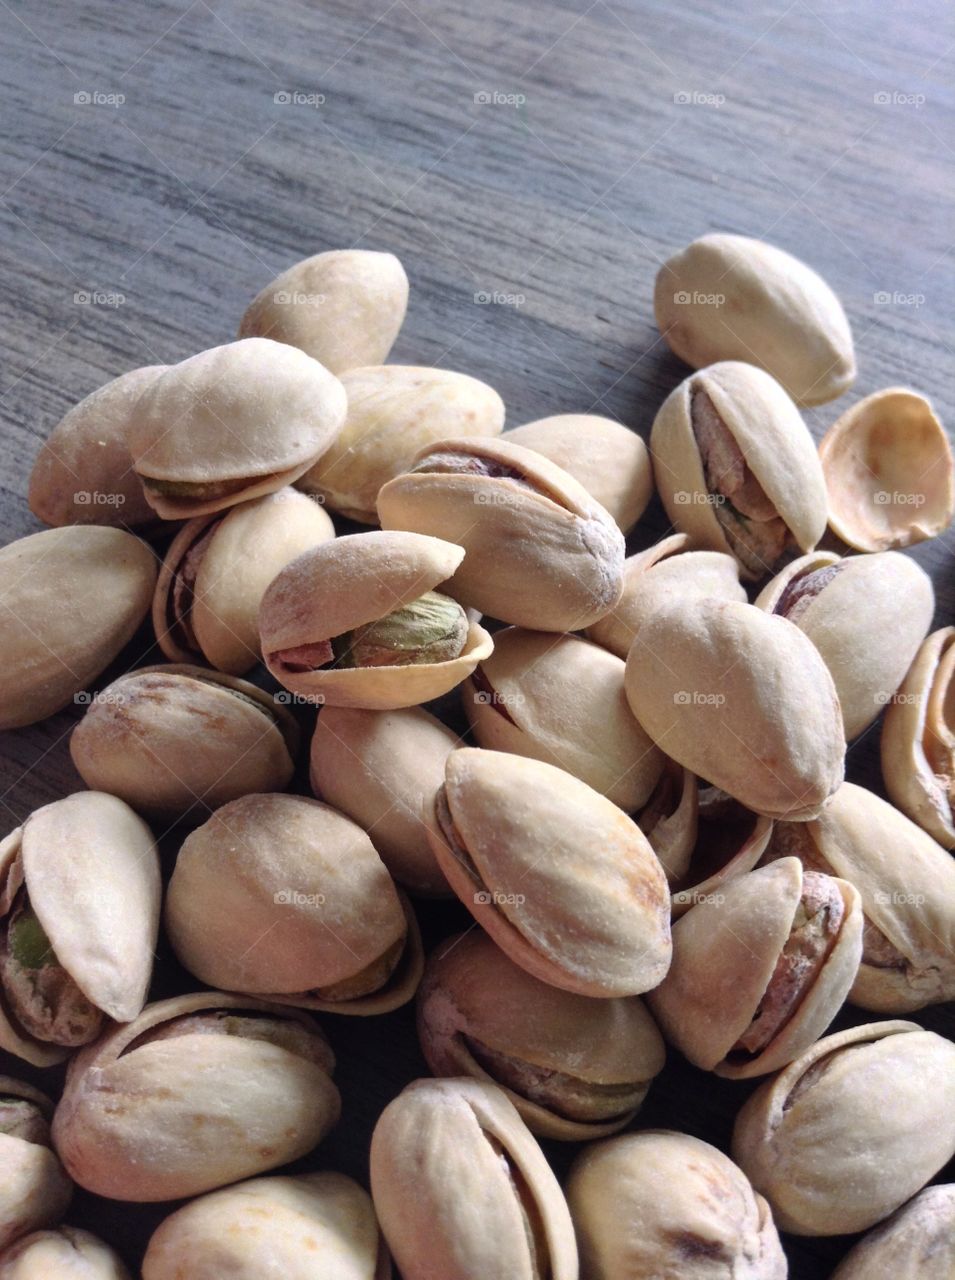 Pistachios as a healthy snack. Handful of pistachios